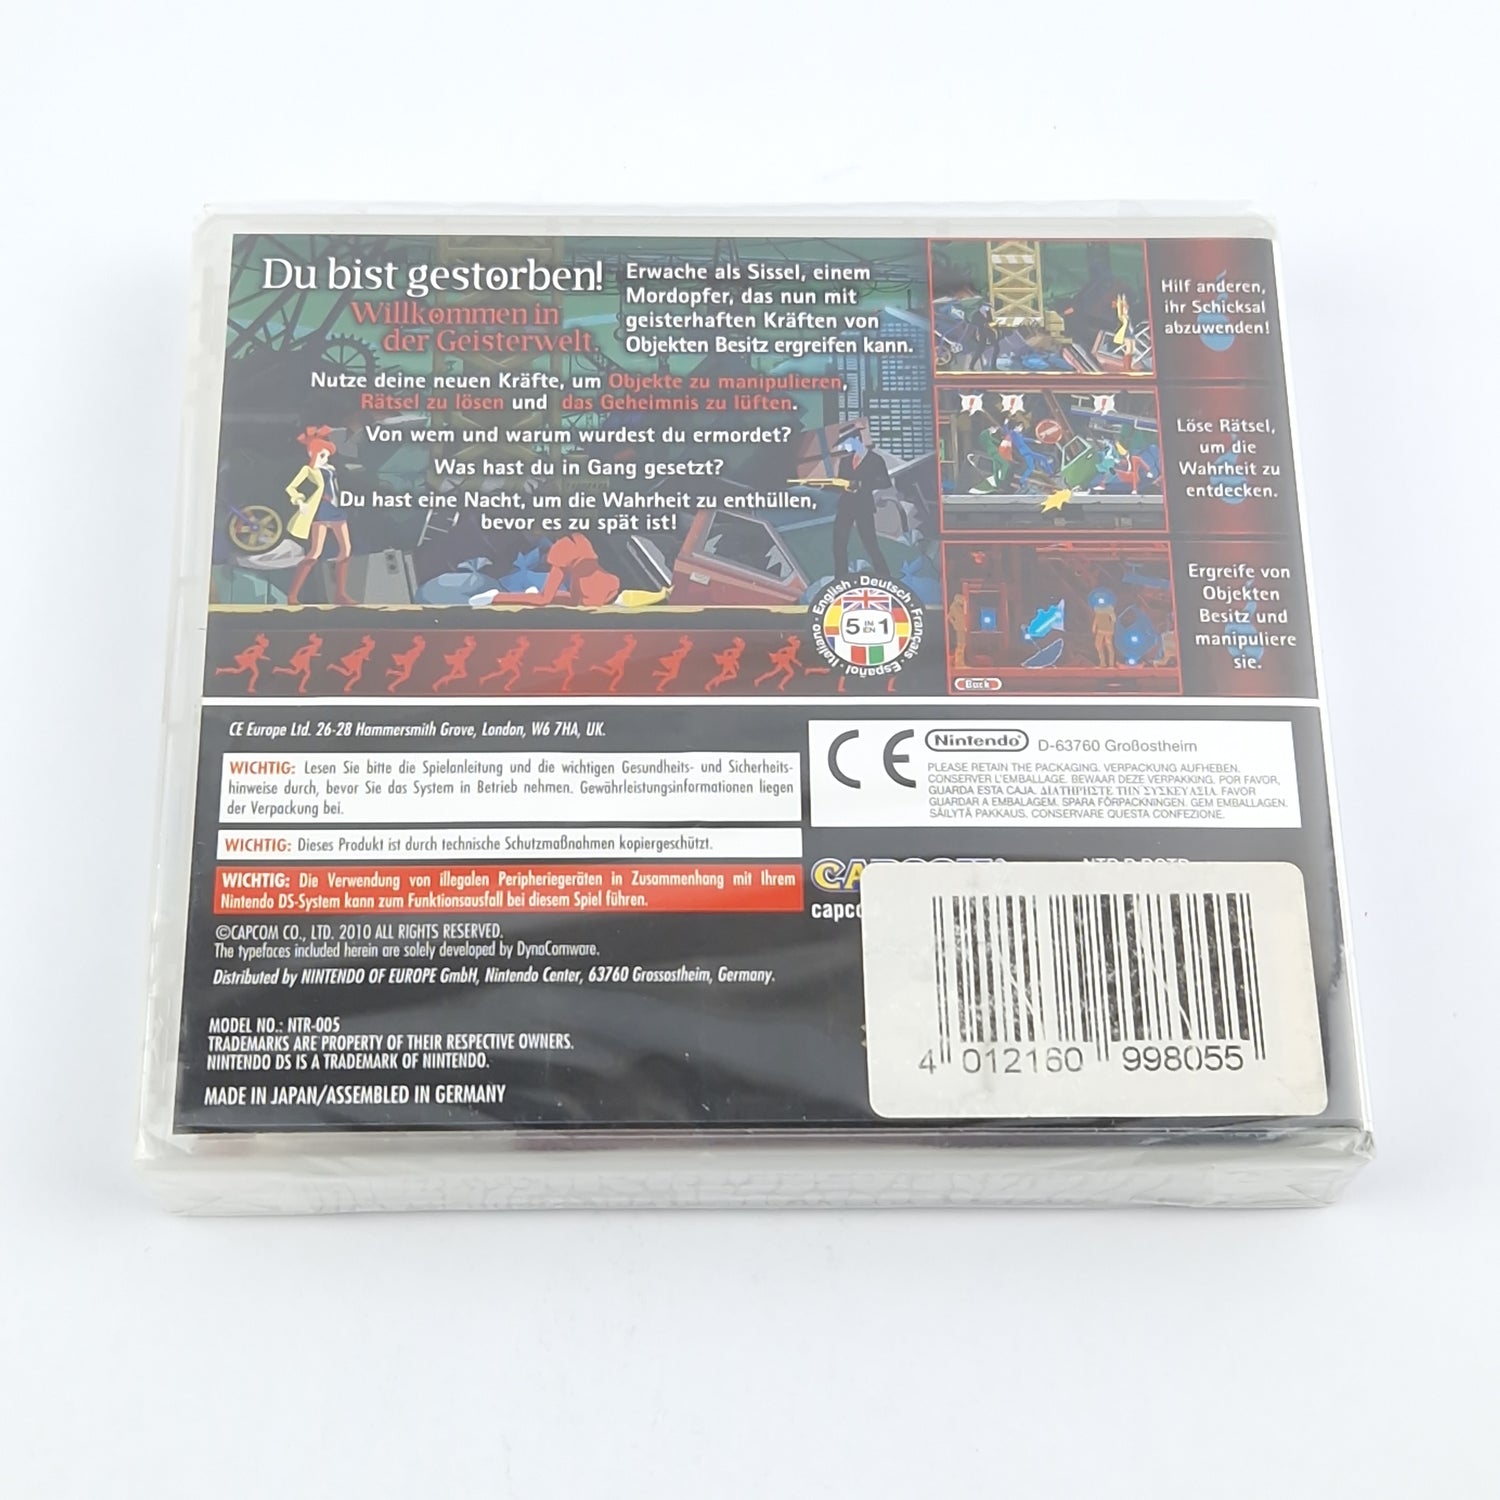 Nintendo DS Game: Ghost Trick - Module Instructions Original Packaging / 3DS 2ds Resealed NEW